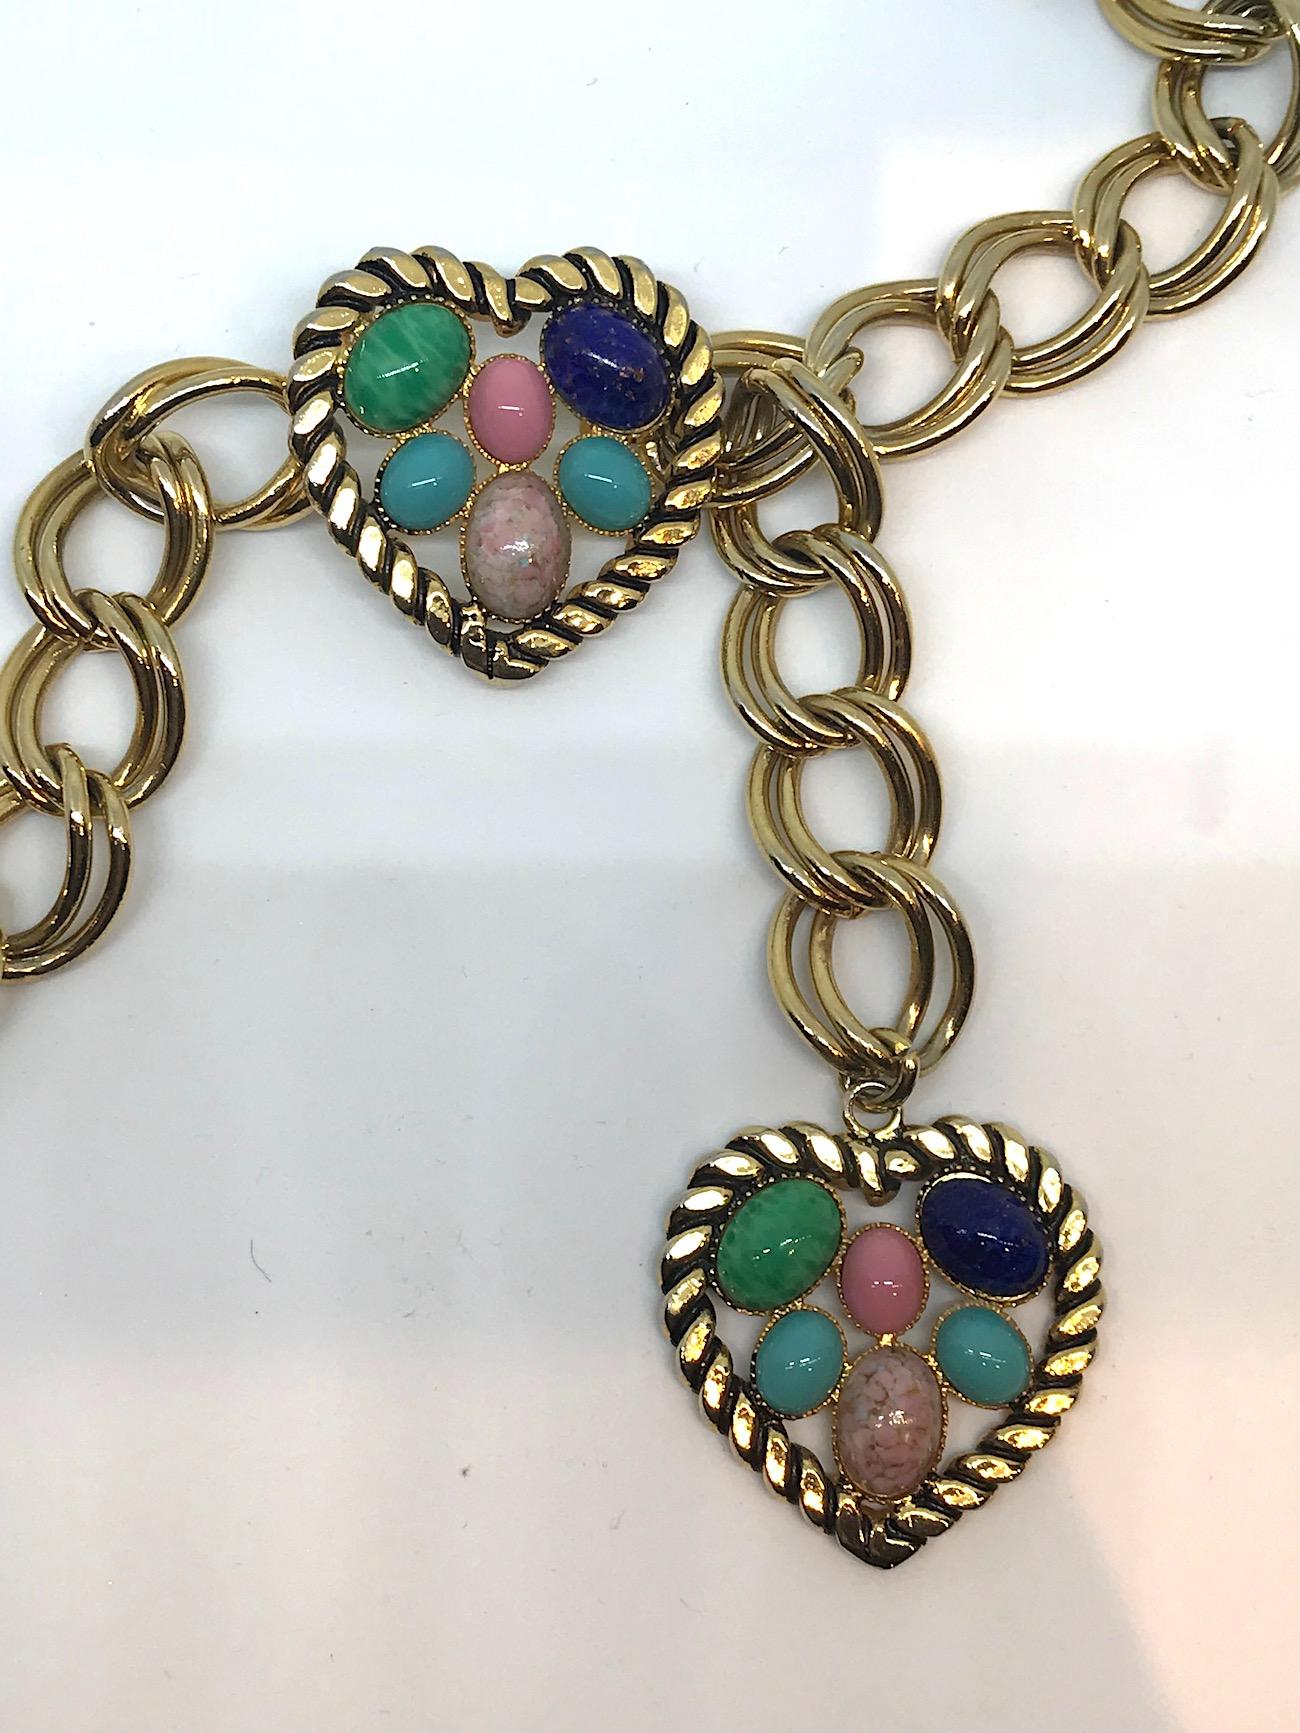 From the collection of fashionable actor Elsa Martinelli is this lovely gold tone double link belt 3/4 inch wide with two cabochon heart charms circa 1980/90. At on end is a heart pendant and at the opposite end is the hear charm with a hook clasp.